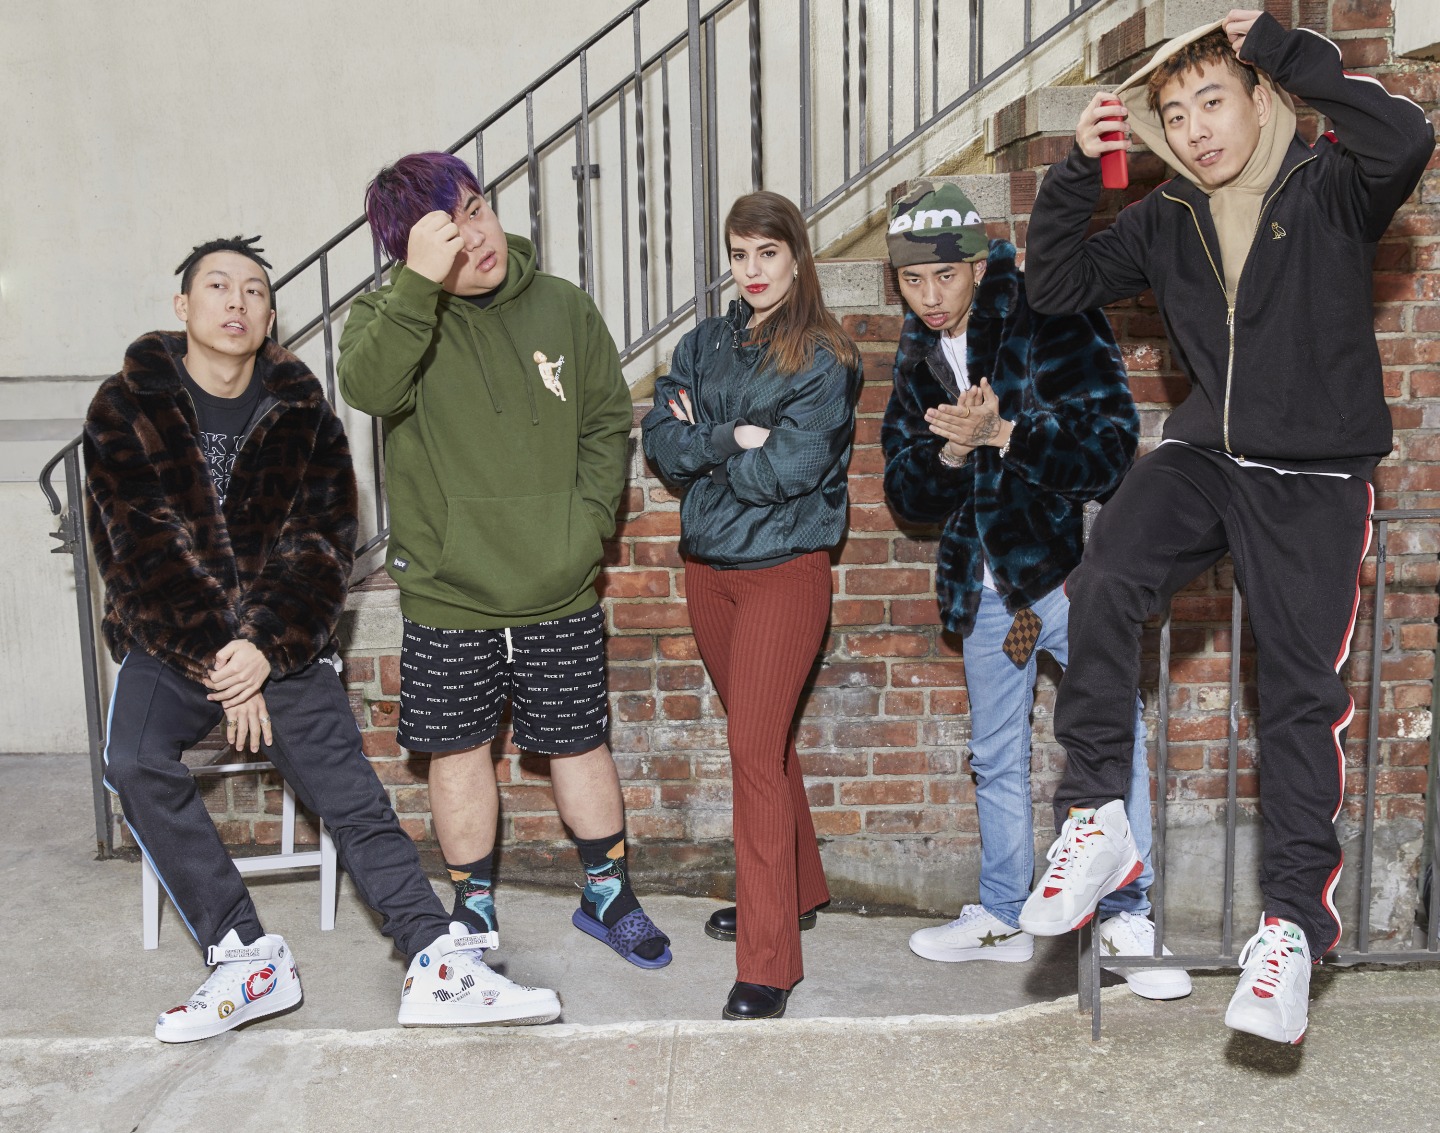 Meet Lana Larkin, the woman behind Higher Brothers’s global crossover